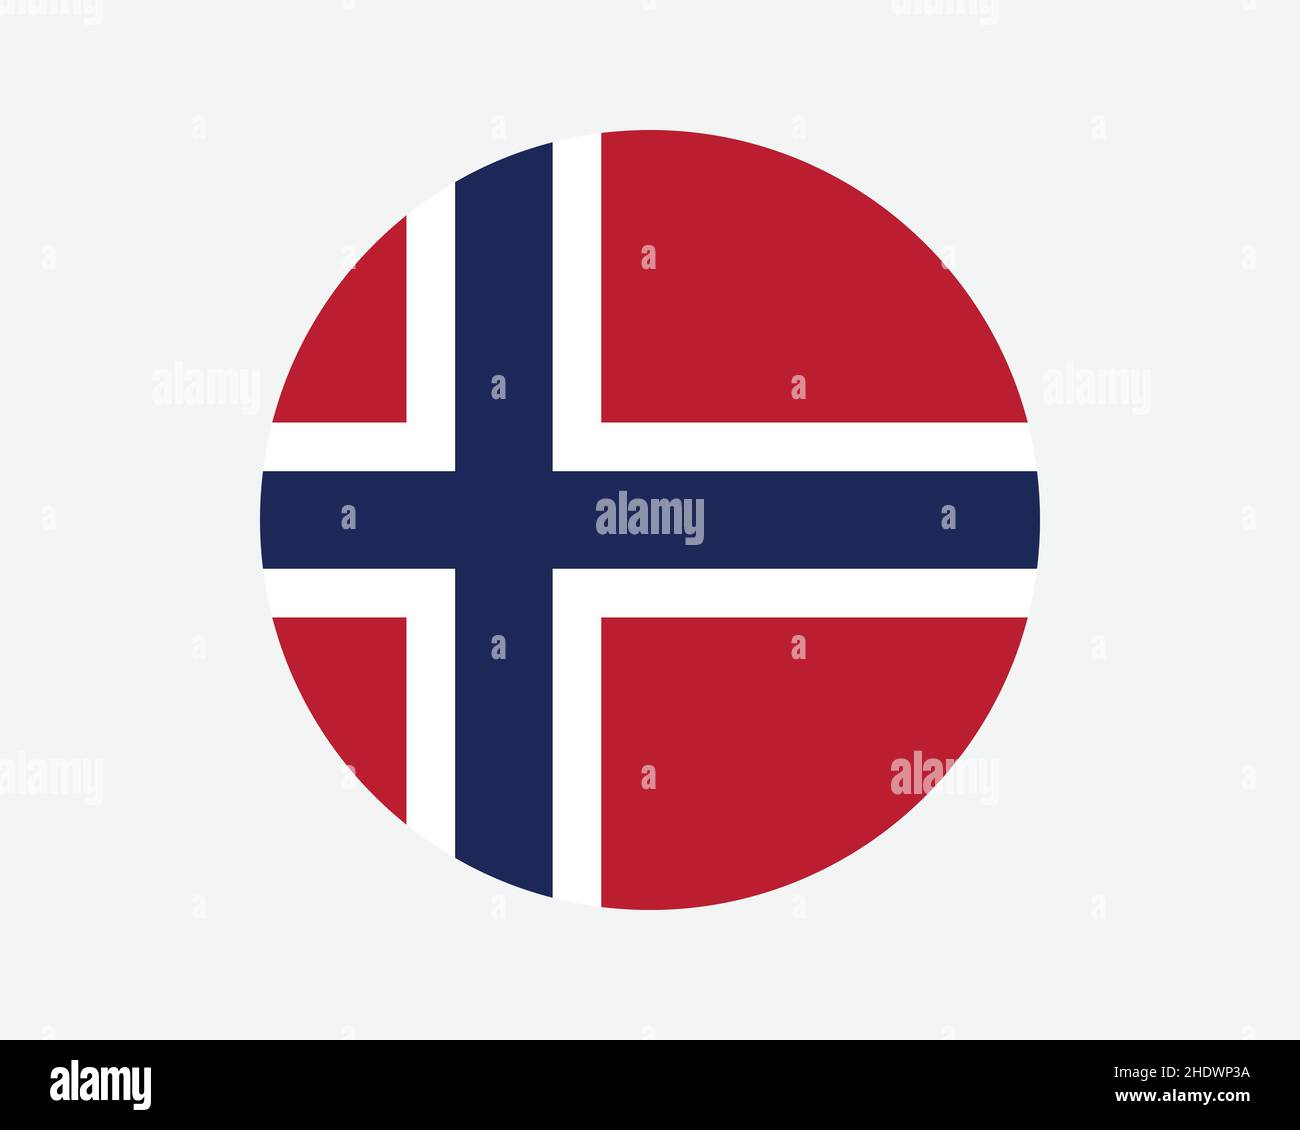 Norway Round Country Flag. Norwegian Circle National Flag. Kingdom of Norway Circular Shape Button Banner. EPS Vector Illustration. Stock Vector